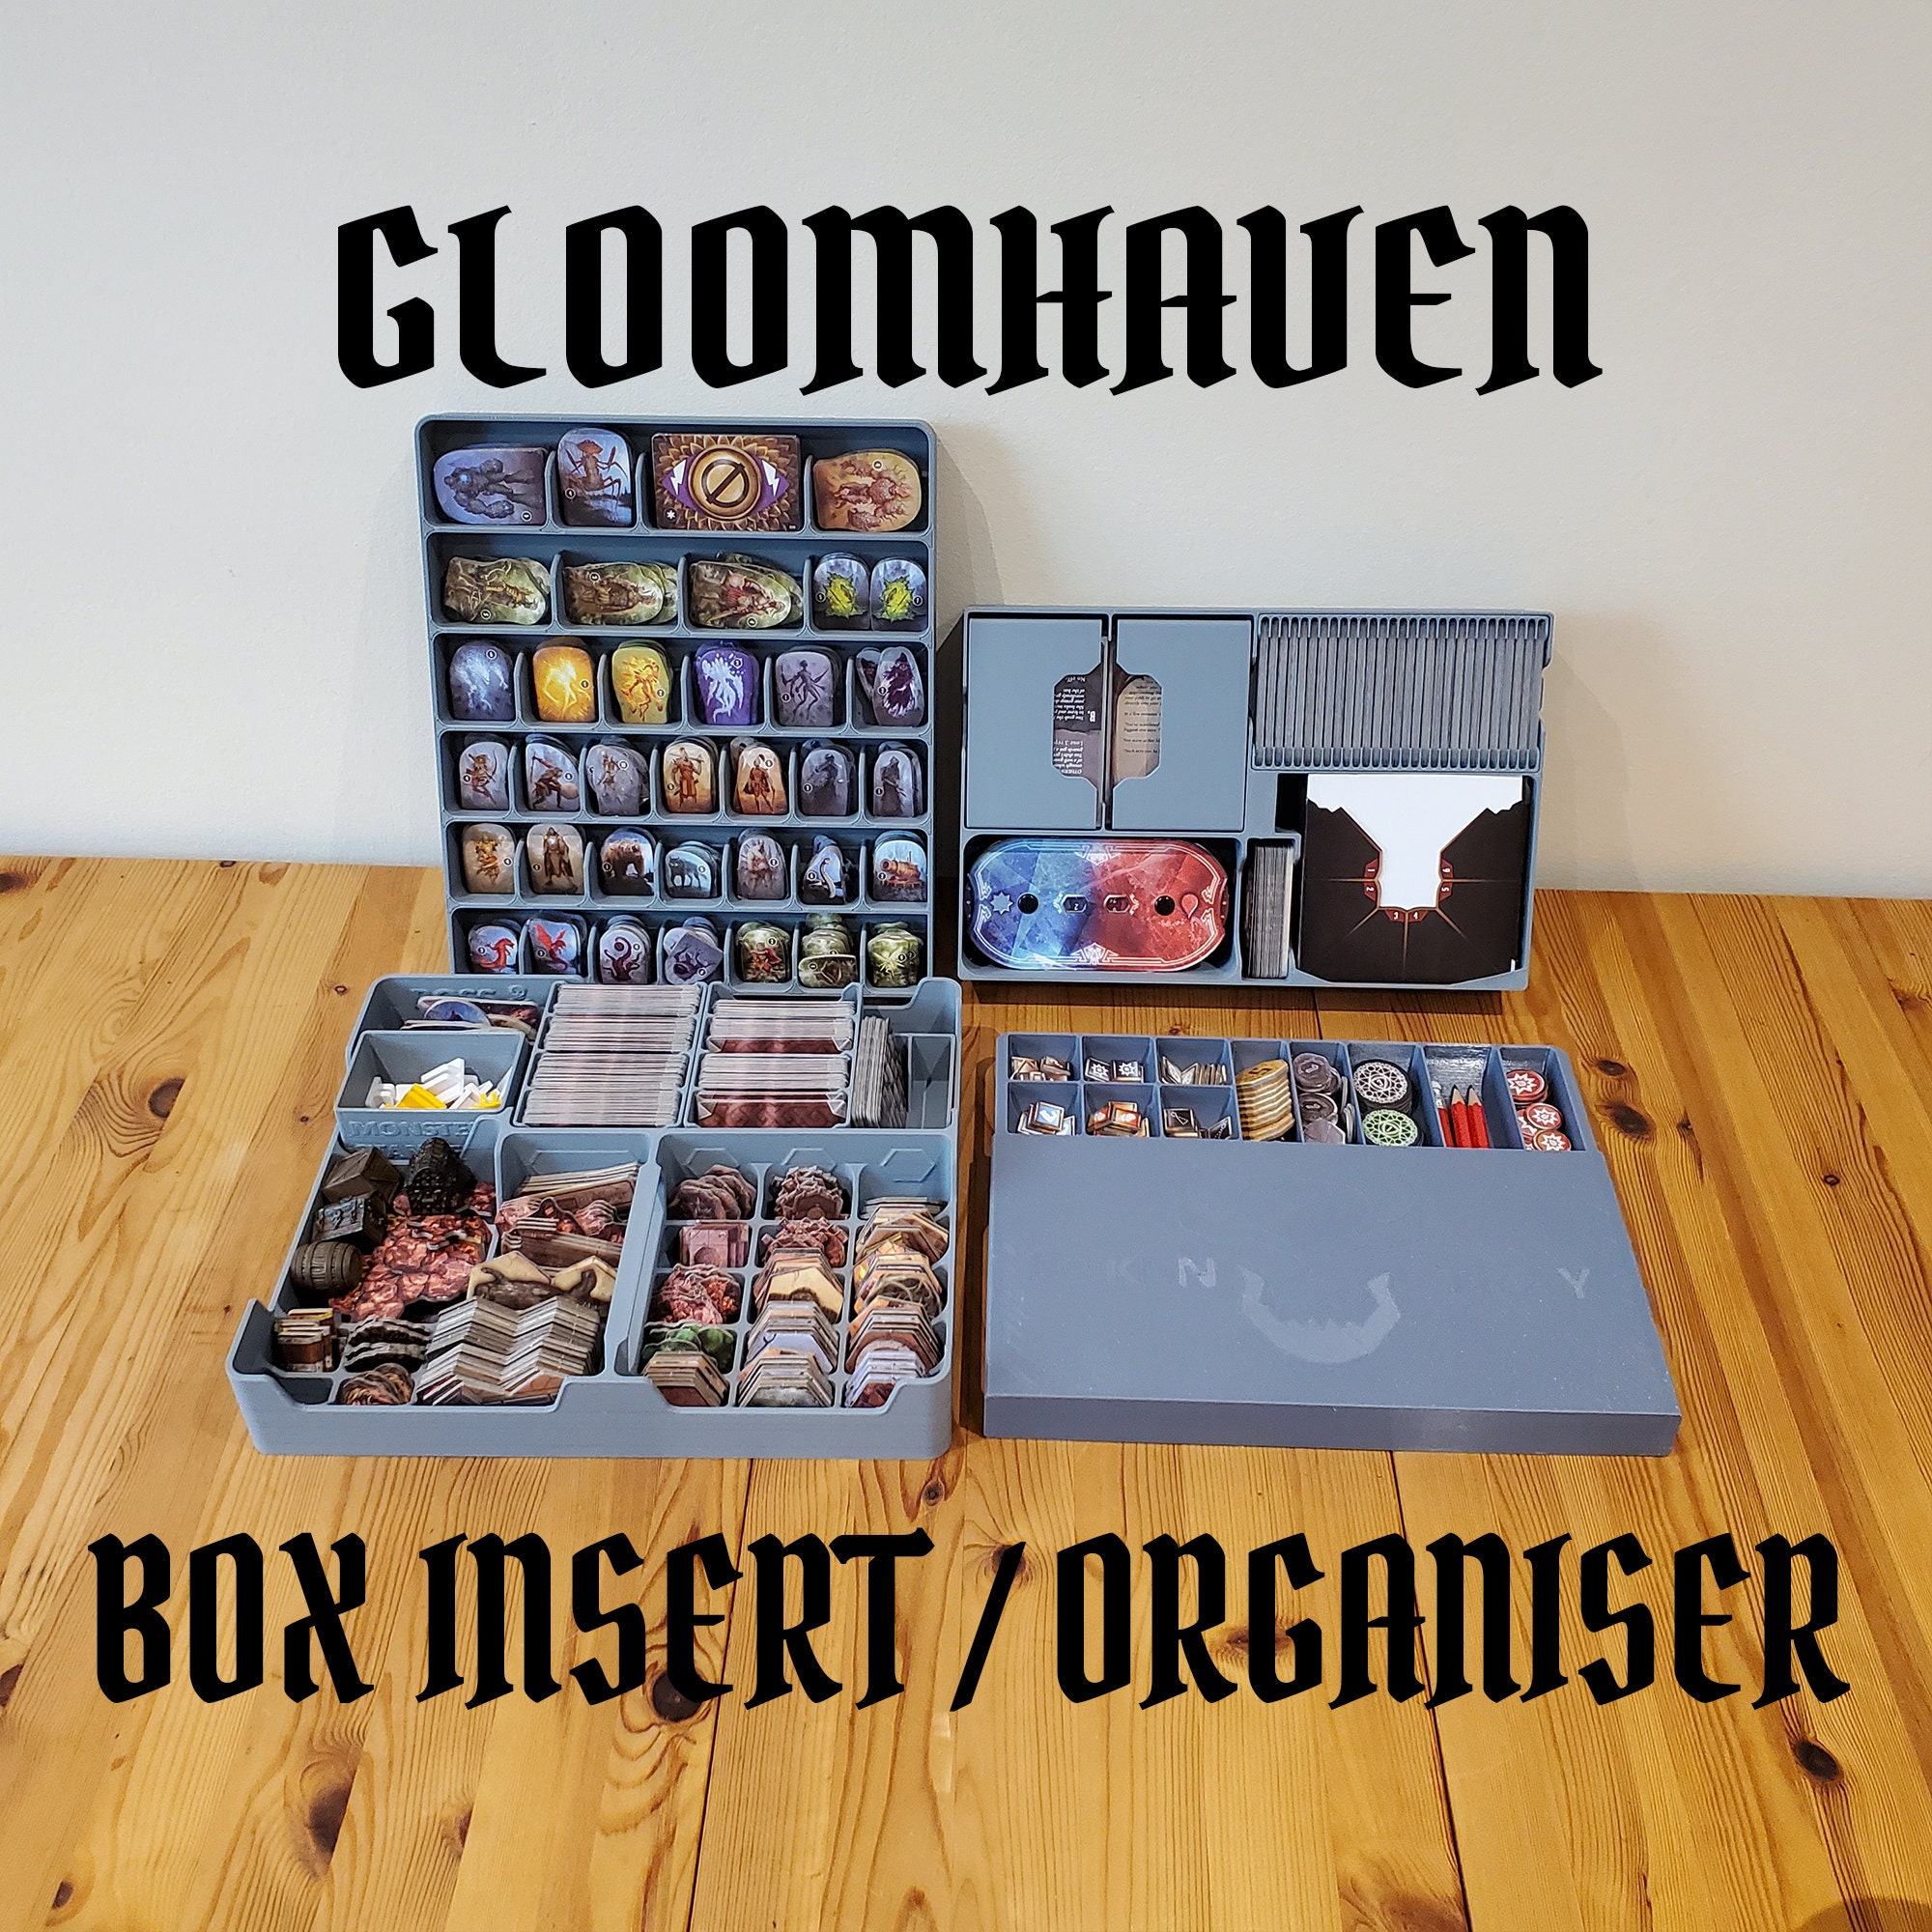 Gloomhaven Organizer 2nd-6th Ed Board Game, Gloomhaven Base Game Insert,  Gloomhaven Storage Solution Upgrade and Accessory 